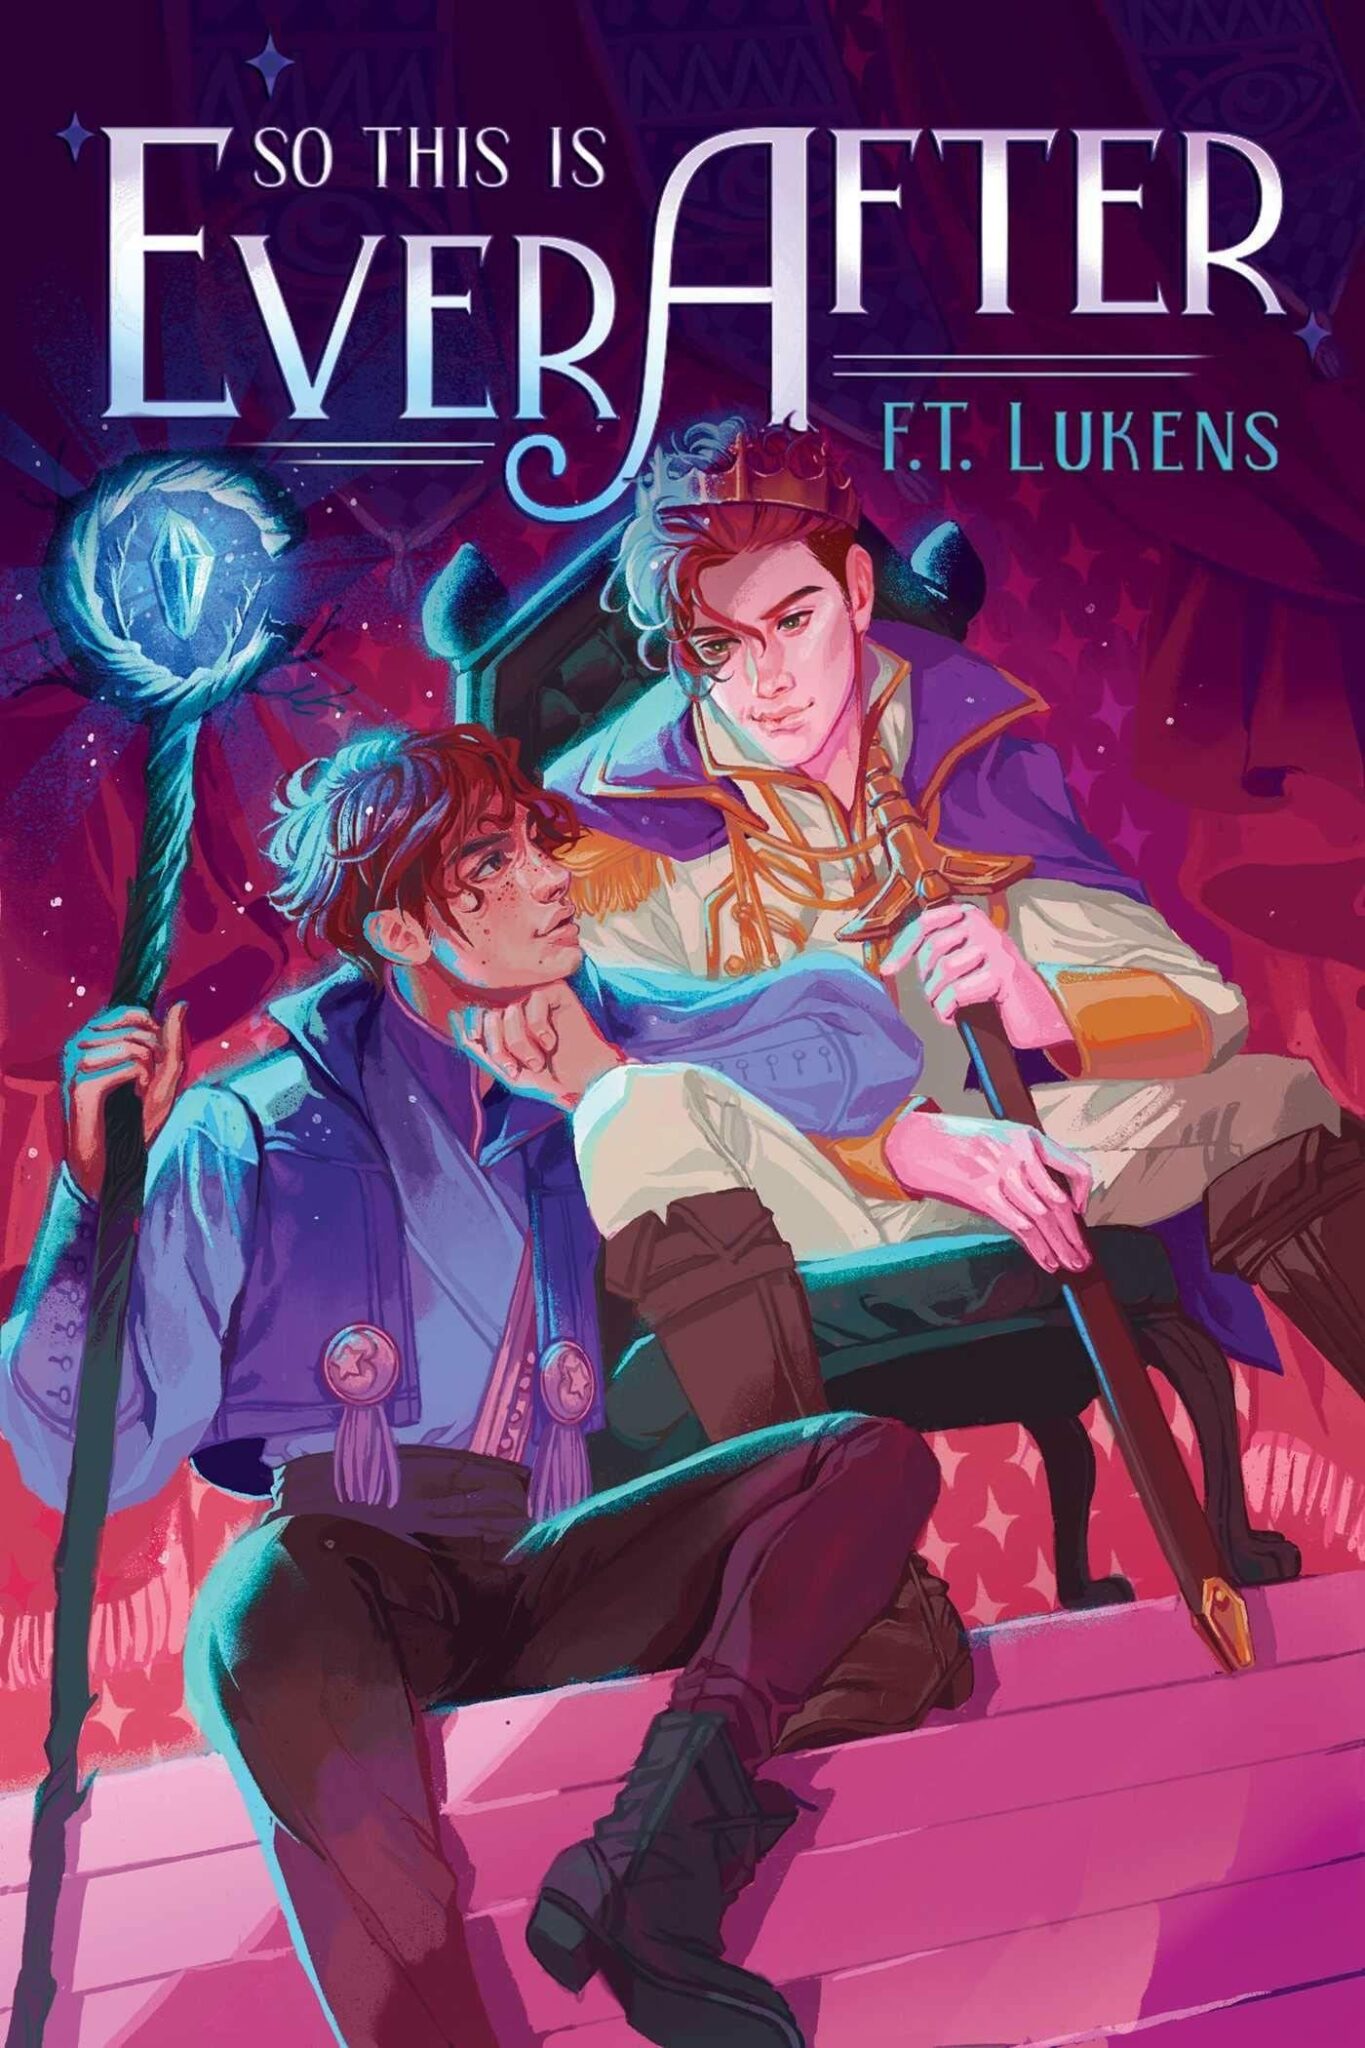 So This Is Ever After F.T. Lukens 2024 Release Check Reads